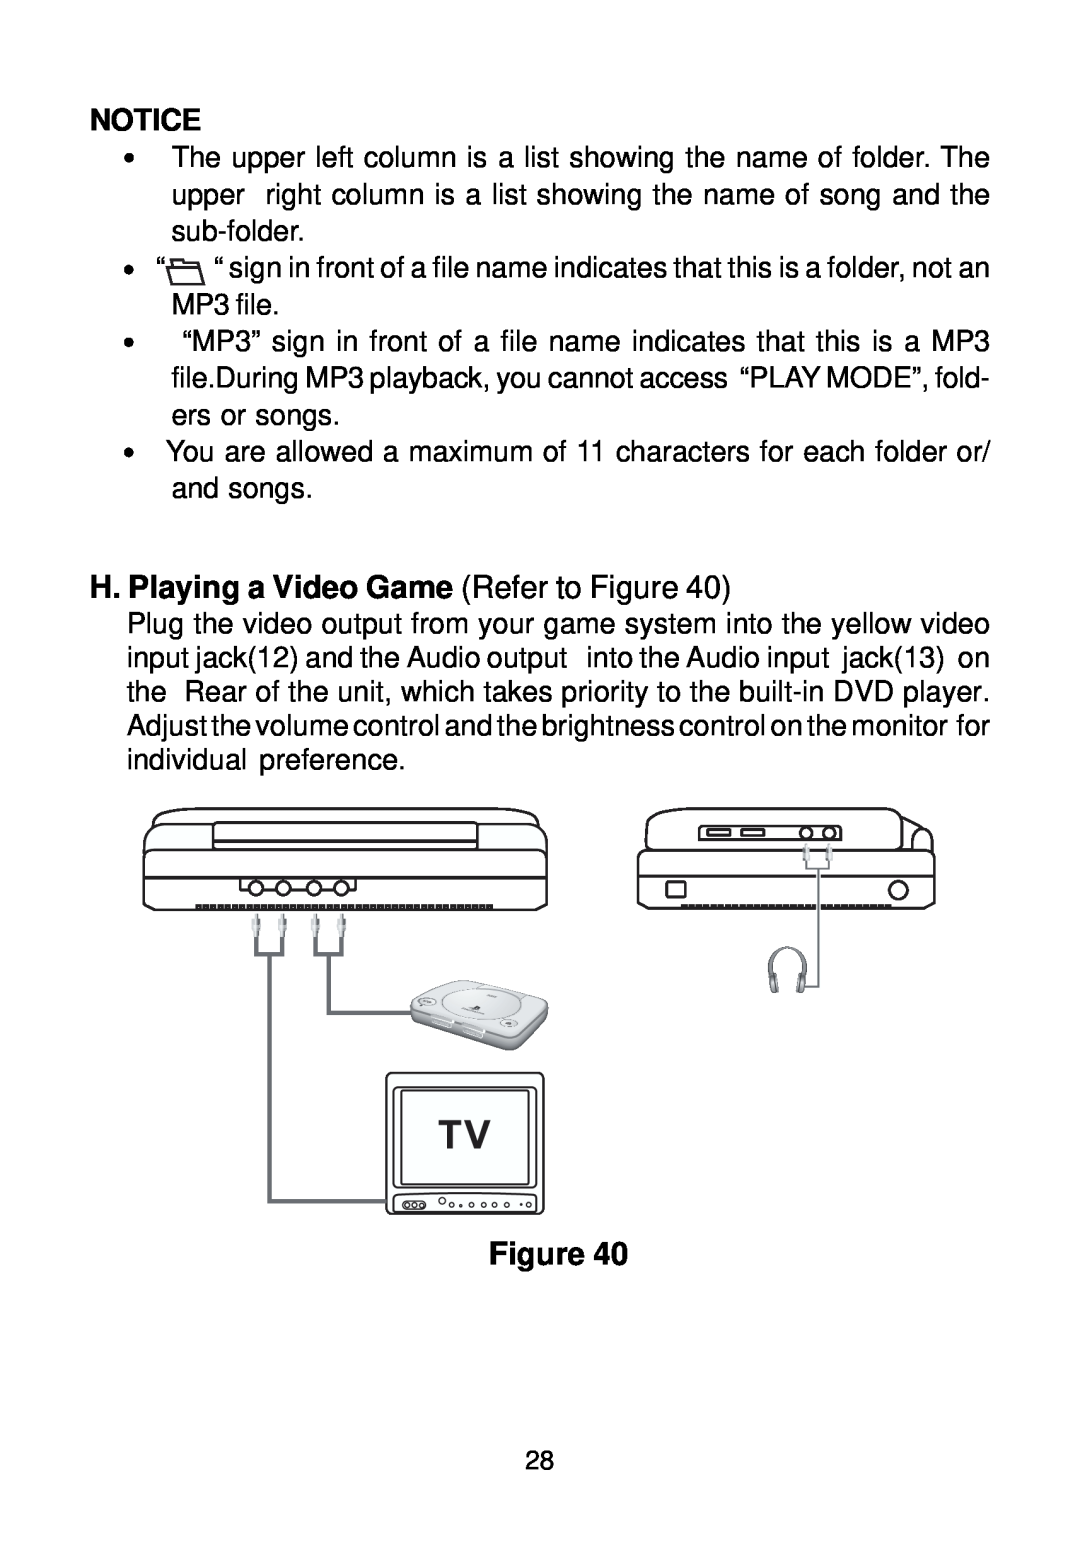 Audiovox VBP58 manual H. Playing a Video Game Refer to Figure 